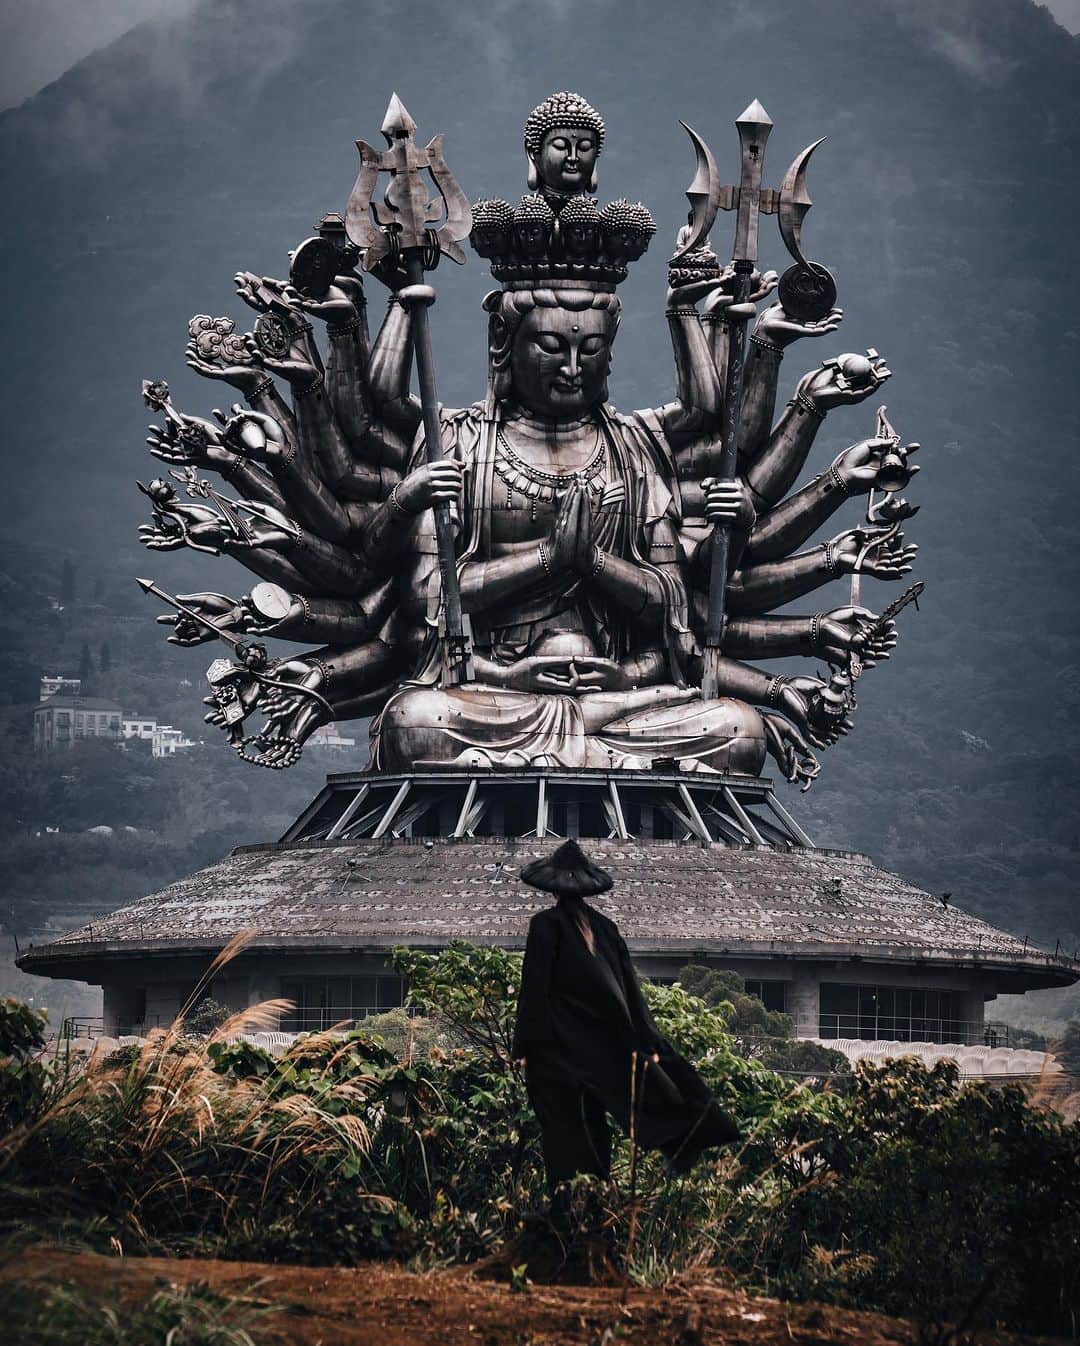 R̸K̸のインスタグラム：「Temple Pack in Taiwan ・ ・ ・ ・ #beautifuldestinations #earthfocus #earthbestshots #earthoffcial #earthpix #台湾#台湾 #Taiwan #thegreatplanet #discoverearth #livingonearth  #theglobewanderer #awesome_photographers #wonderful_places #TLPics #designboom #voyaged #sonyalpha #bealpha #travellingthroughtheworld #streets_vision  #d_signers #luxuryworldtraveler #fromwhereidrone #onlyforluxury #nightphotography  @sonyalpha  @lightroom @soul.planet @earthfever @9gag @paradise @natgeotravel @awesome.earth @national_archaeology」